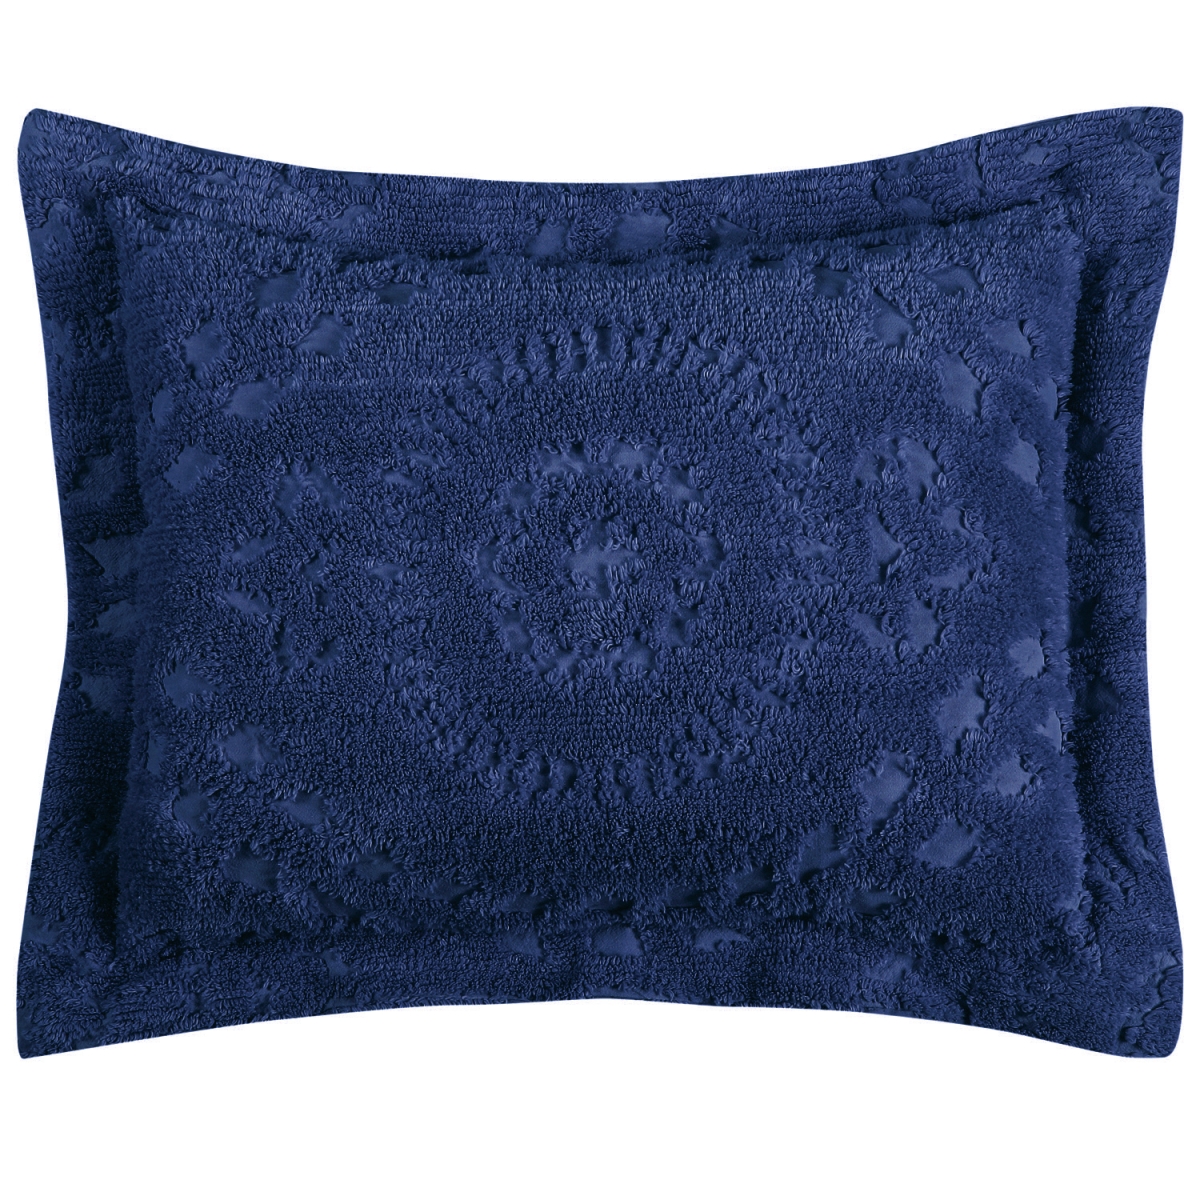 Picture of Better Trends SHR2127NV Rio Cotton Pillow Sham, Navy - Standard Size